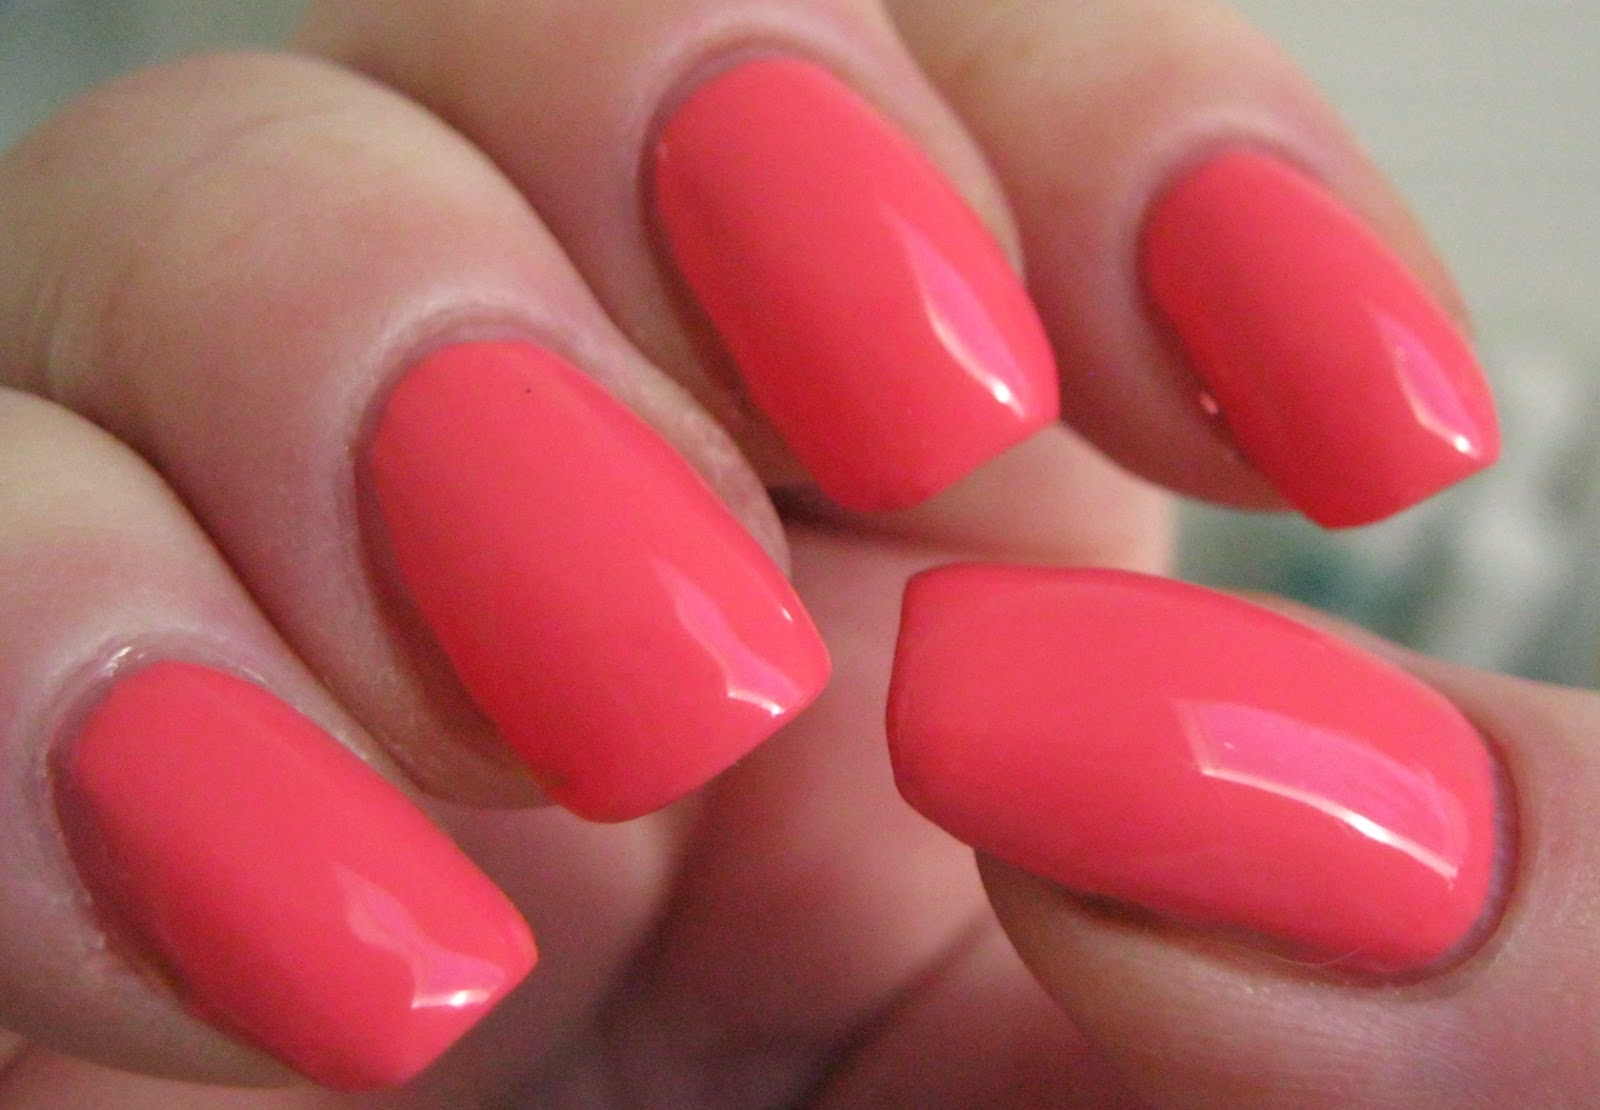 7. Butter London Nail Lacquer in Trout Pout - wide 7